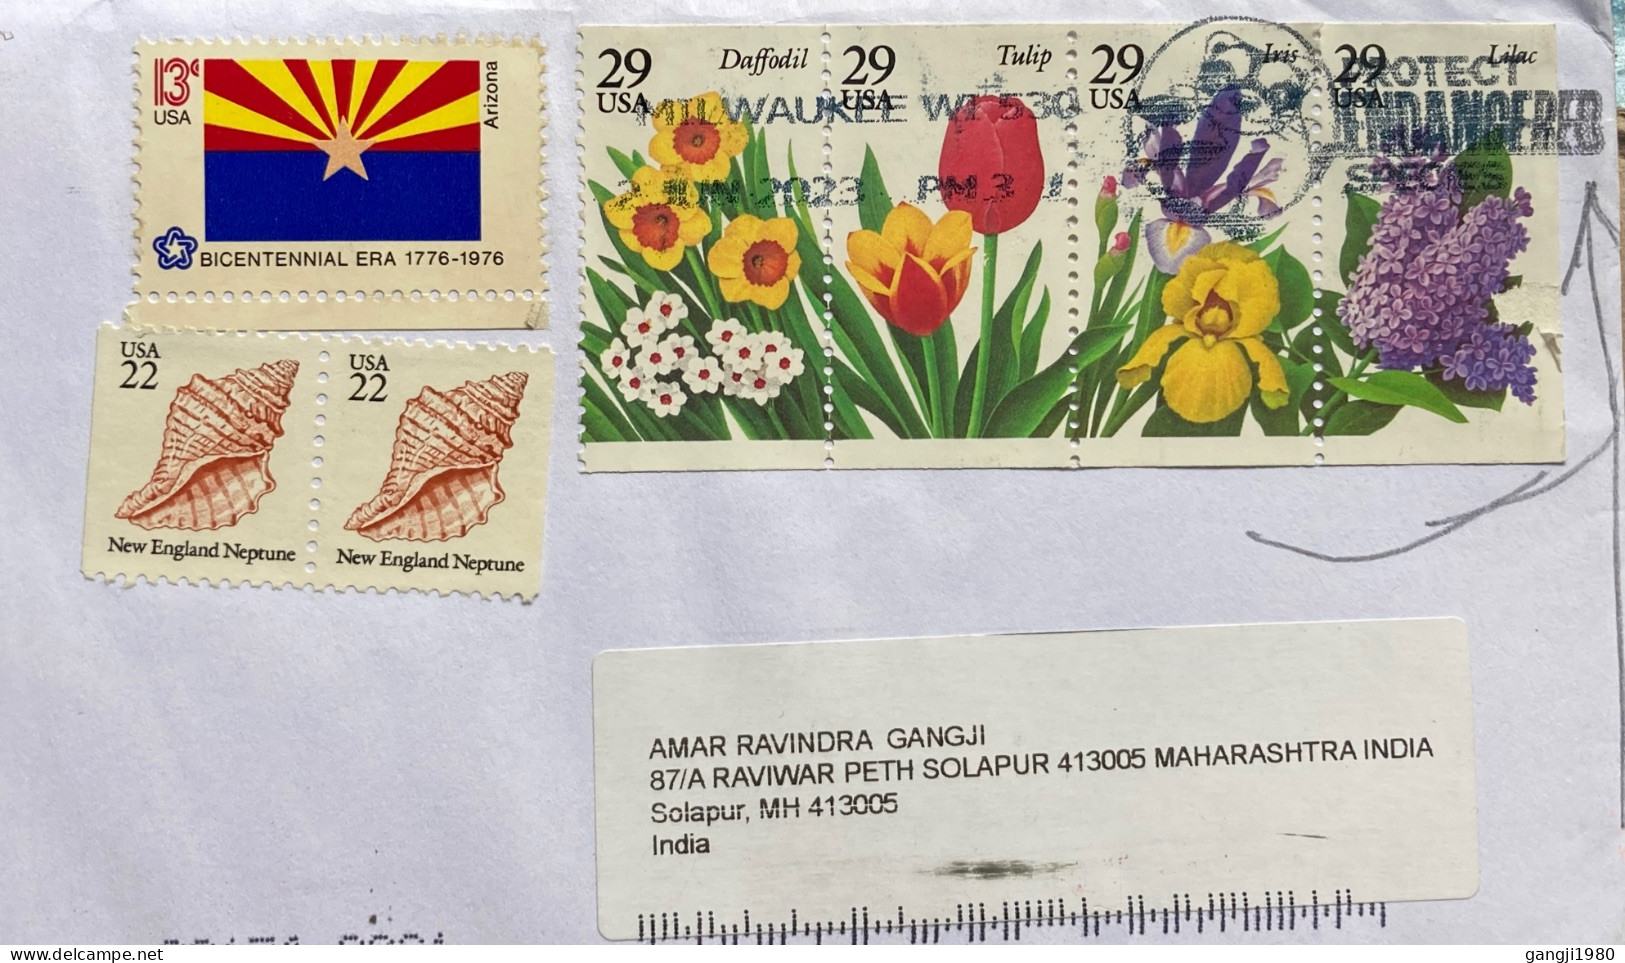 USA-2023, COVER USED TO INDIA, FLOWER SE-TENENT, ARIZONA FLAG, COUNCH & SHELL, PANDA ANIMAL, WWF, PROTECT ENDANGER SPECI - Briefe U. Dokumente